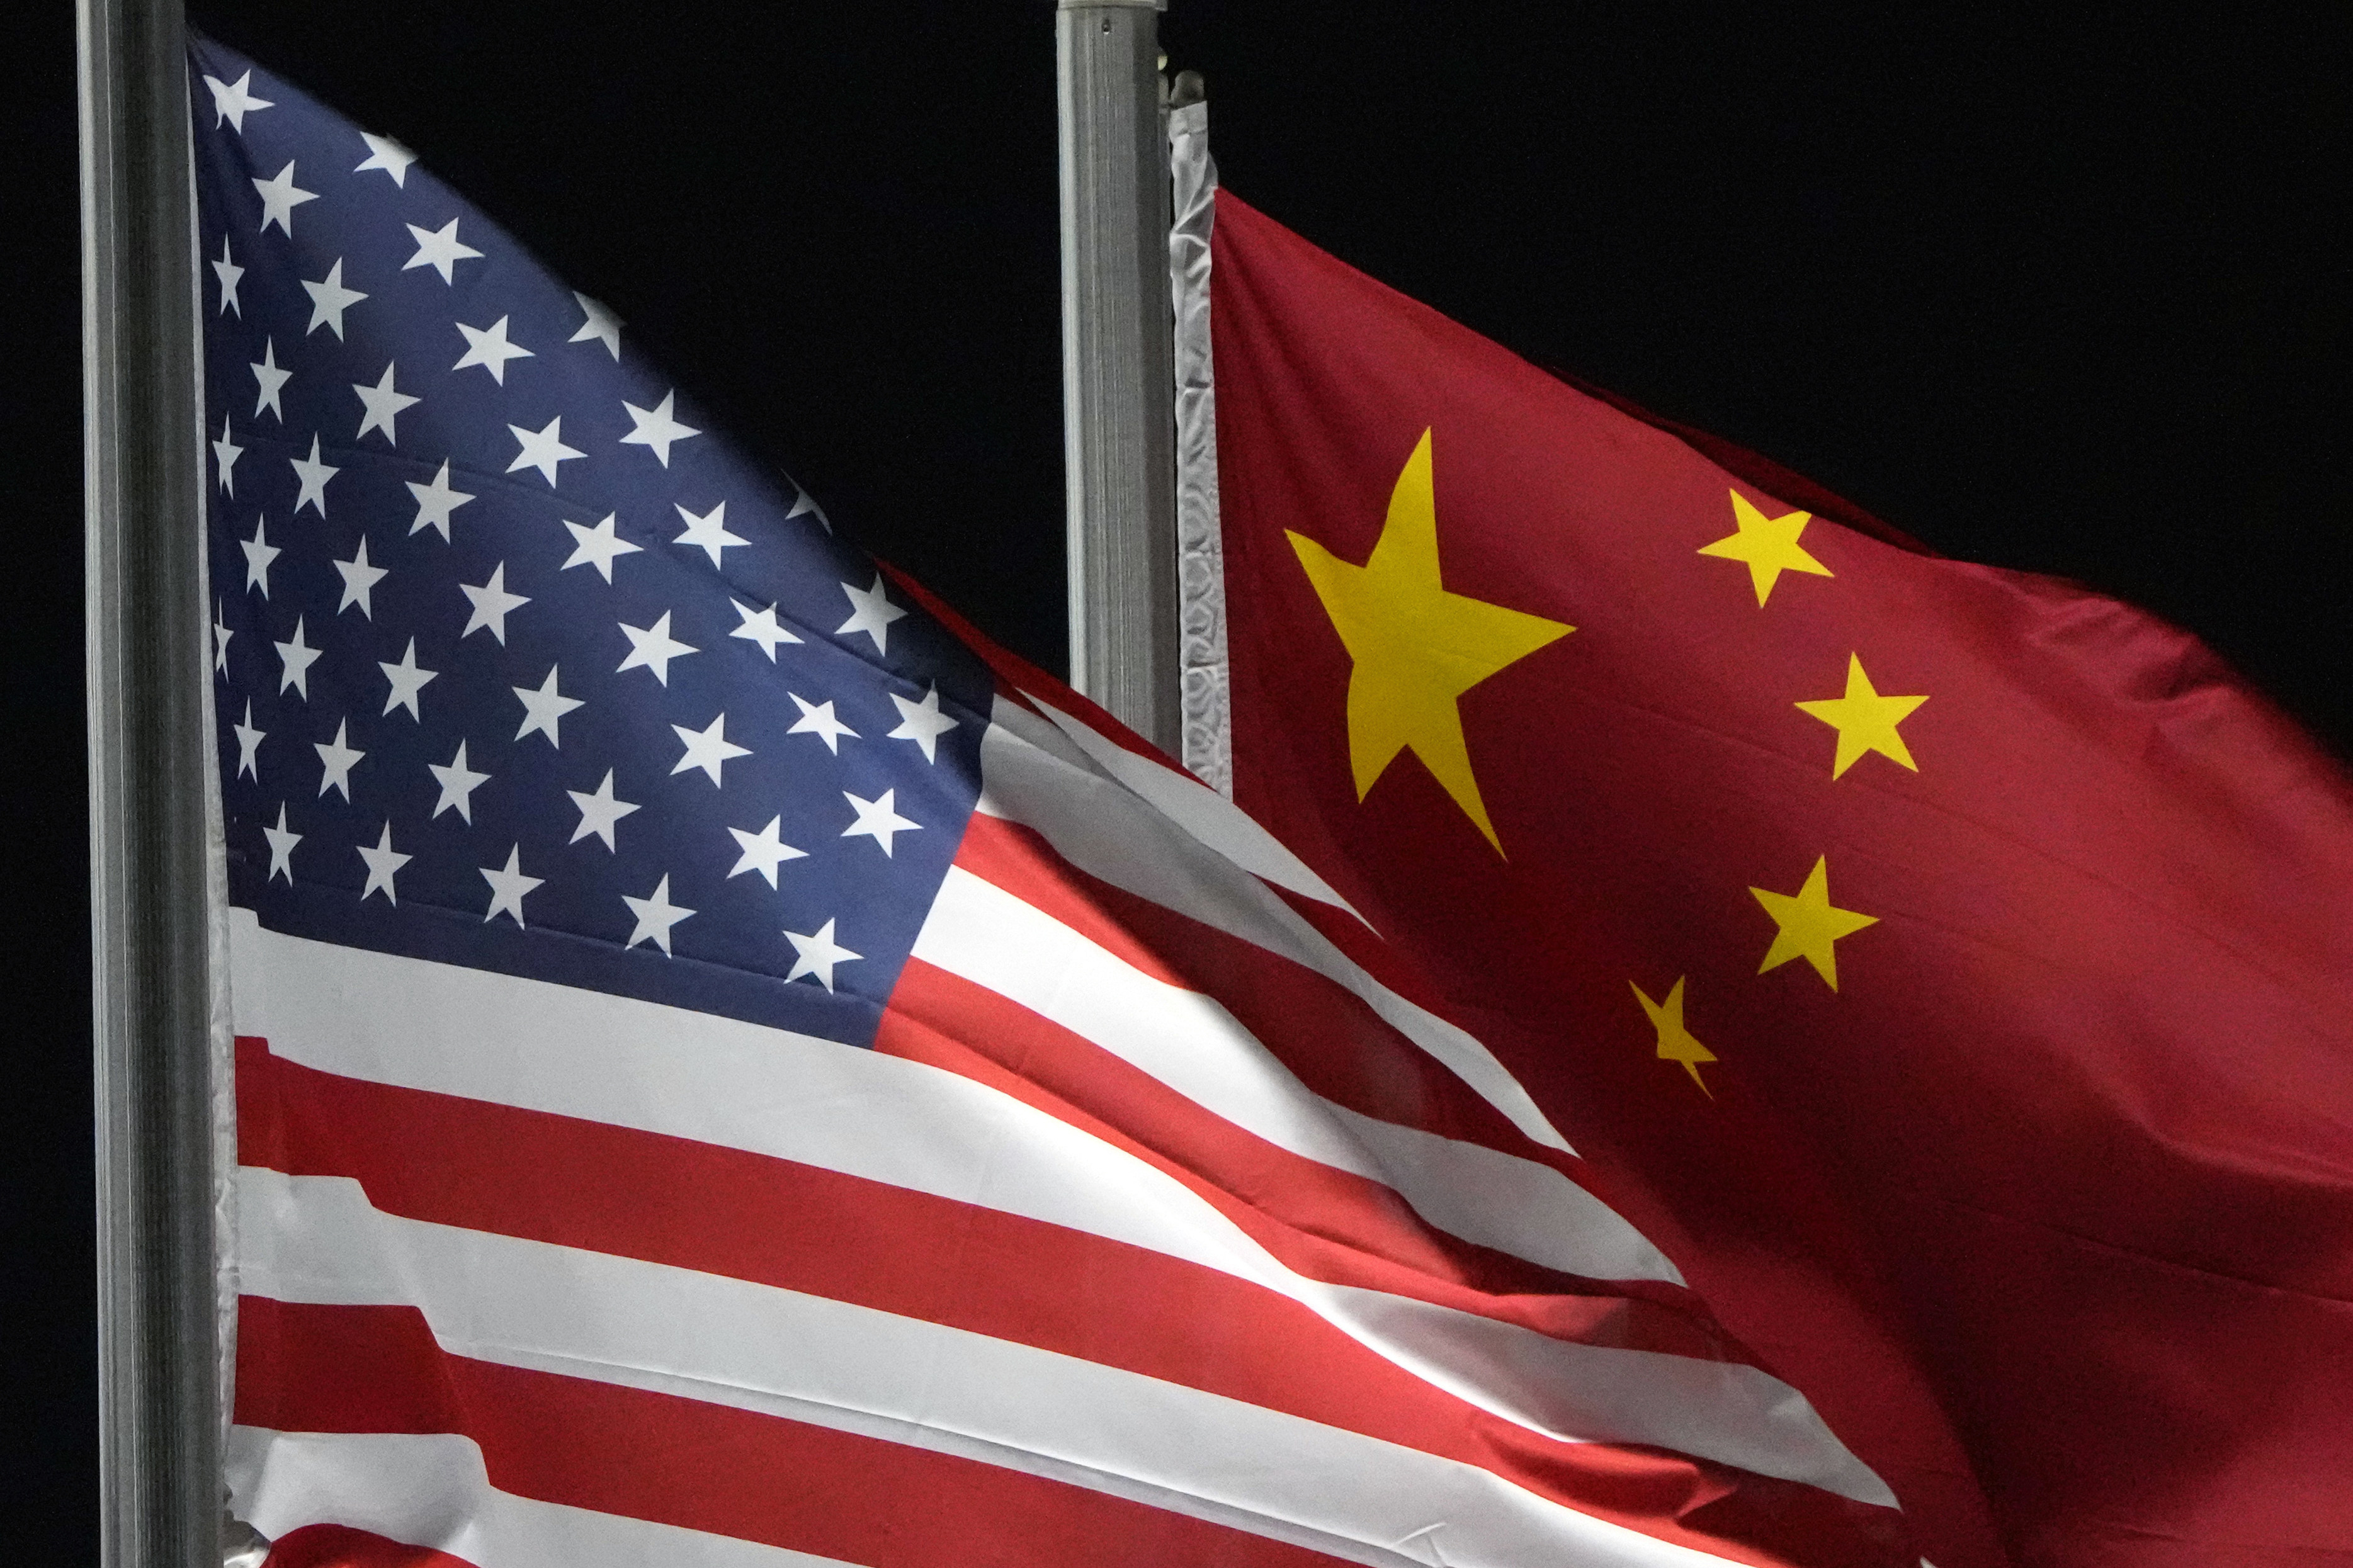 The conference will recognise shifts in the relationship between the US and China, while also embracing the momentum of new optimism to drive progress, the organisers have said. Photo: AP